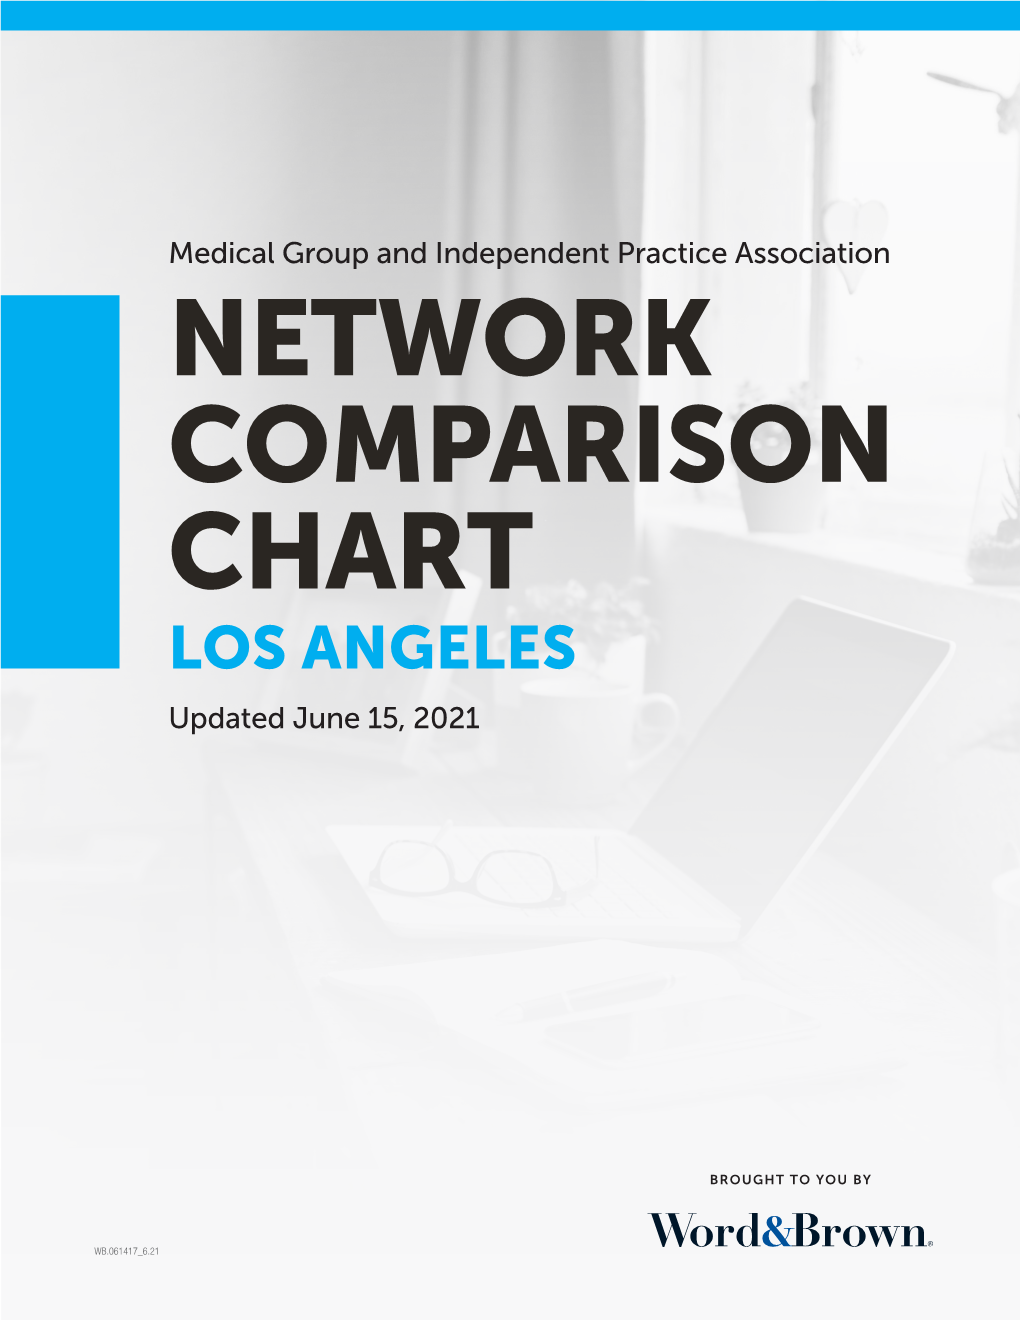 NETWORK COMPARISON CHART LOS ANGELES Updated June 15, 2021